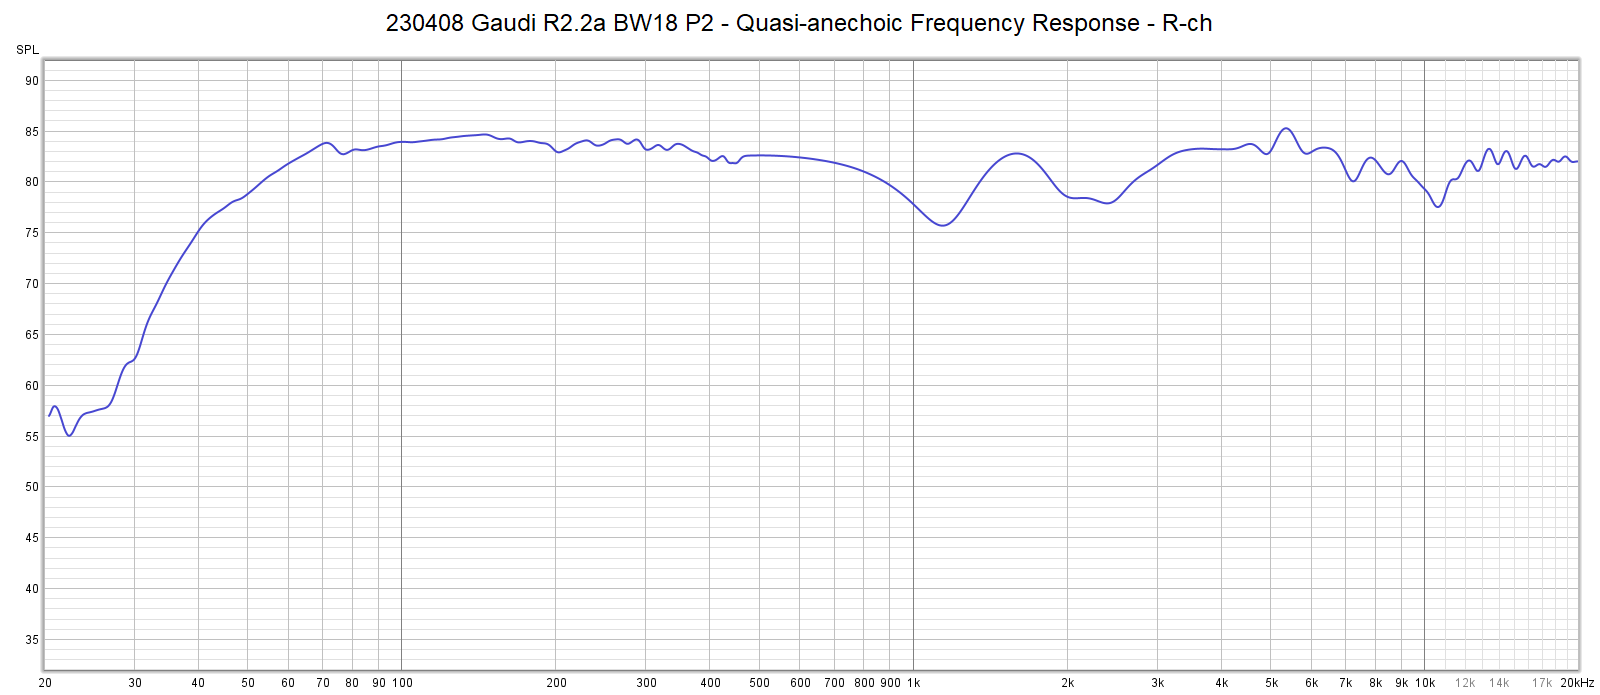 ED3402＋H4401 Frequency Response - Total